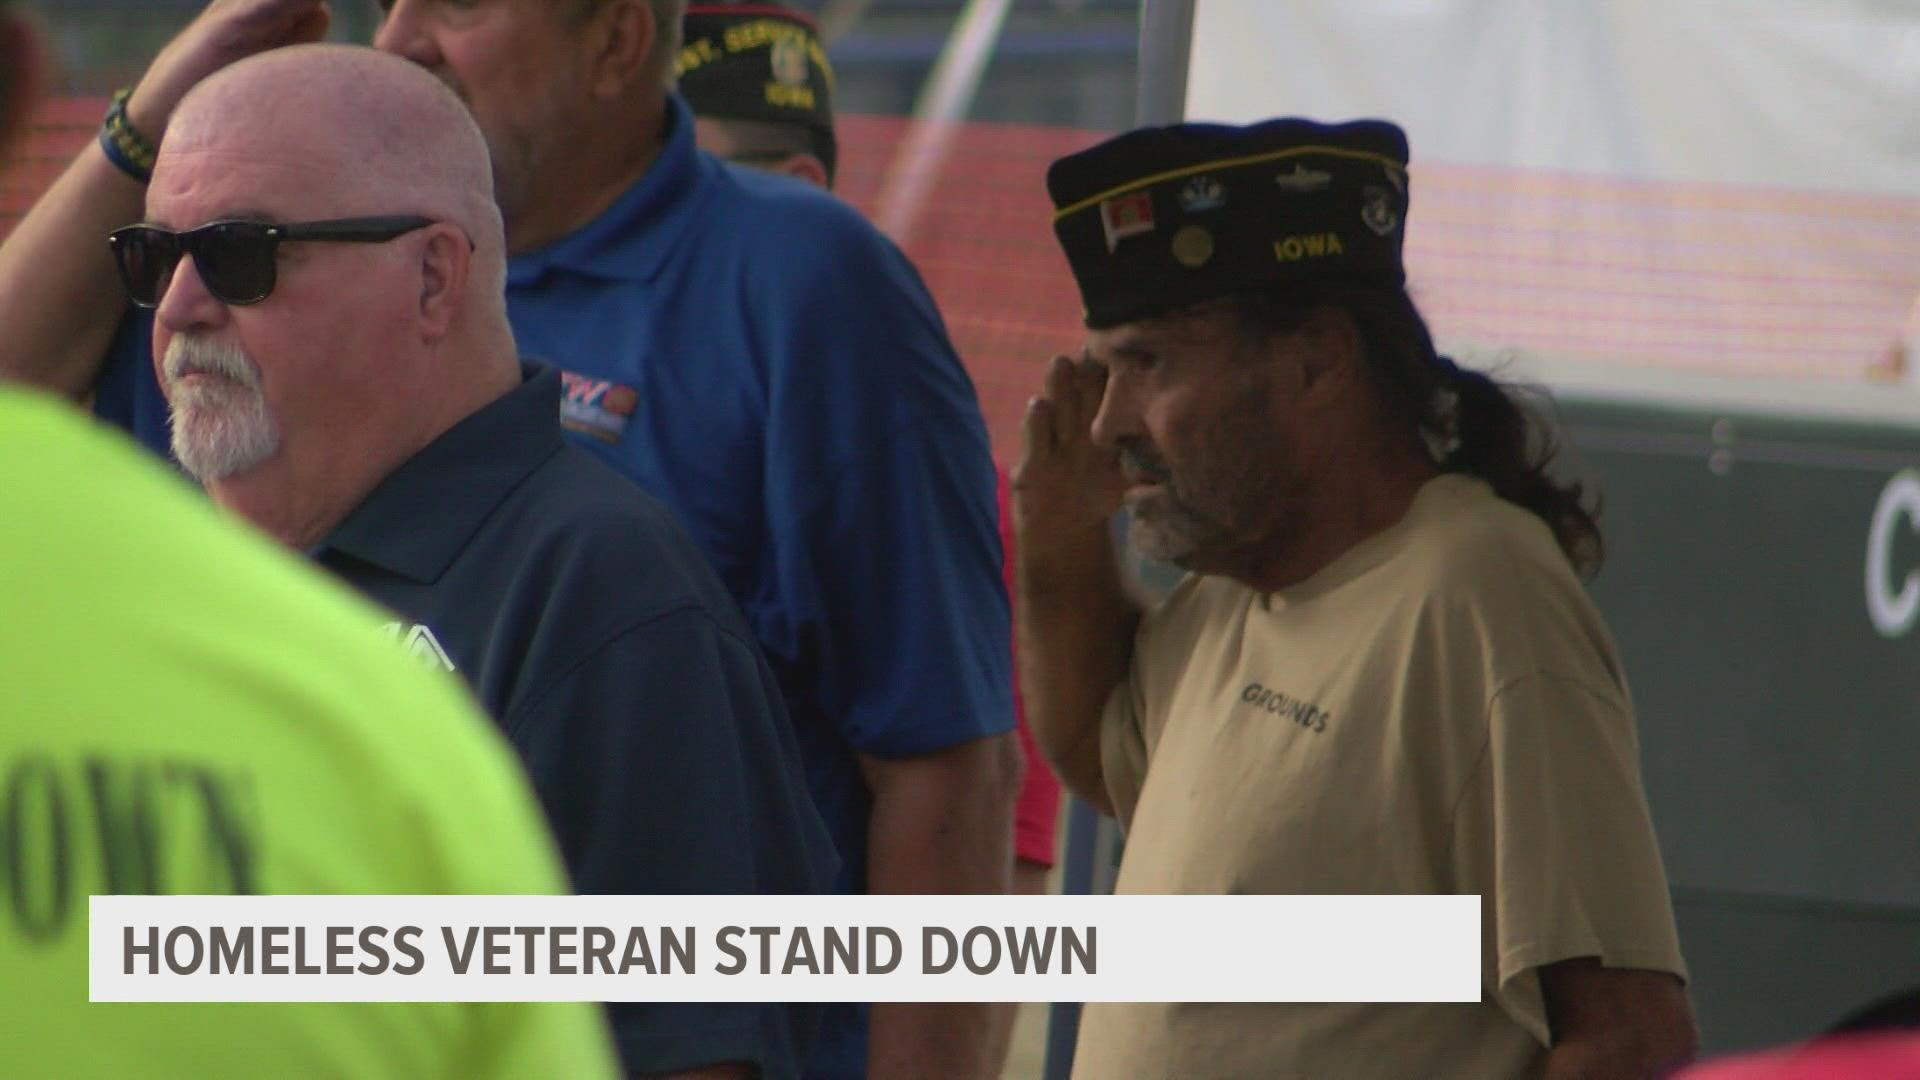 The Homeless Veterans Stand Down was canceled in 2020 due to the pandemic. This year it's coming back stronger than before to help those who risk it all for freedom.